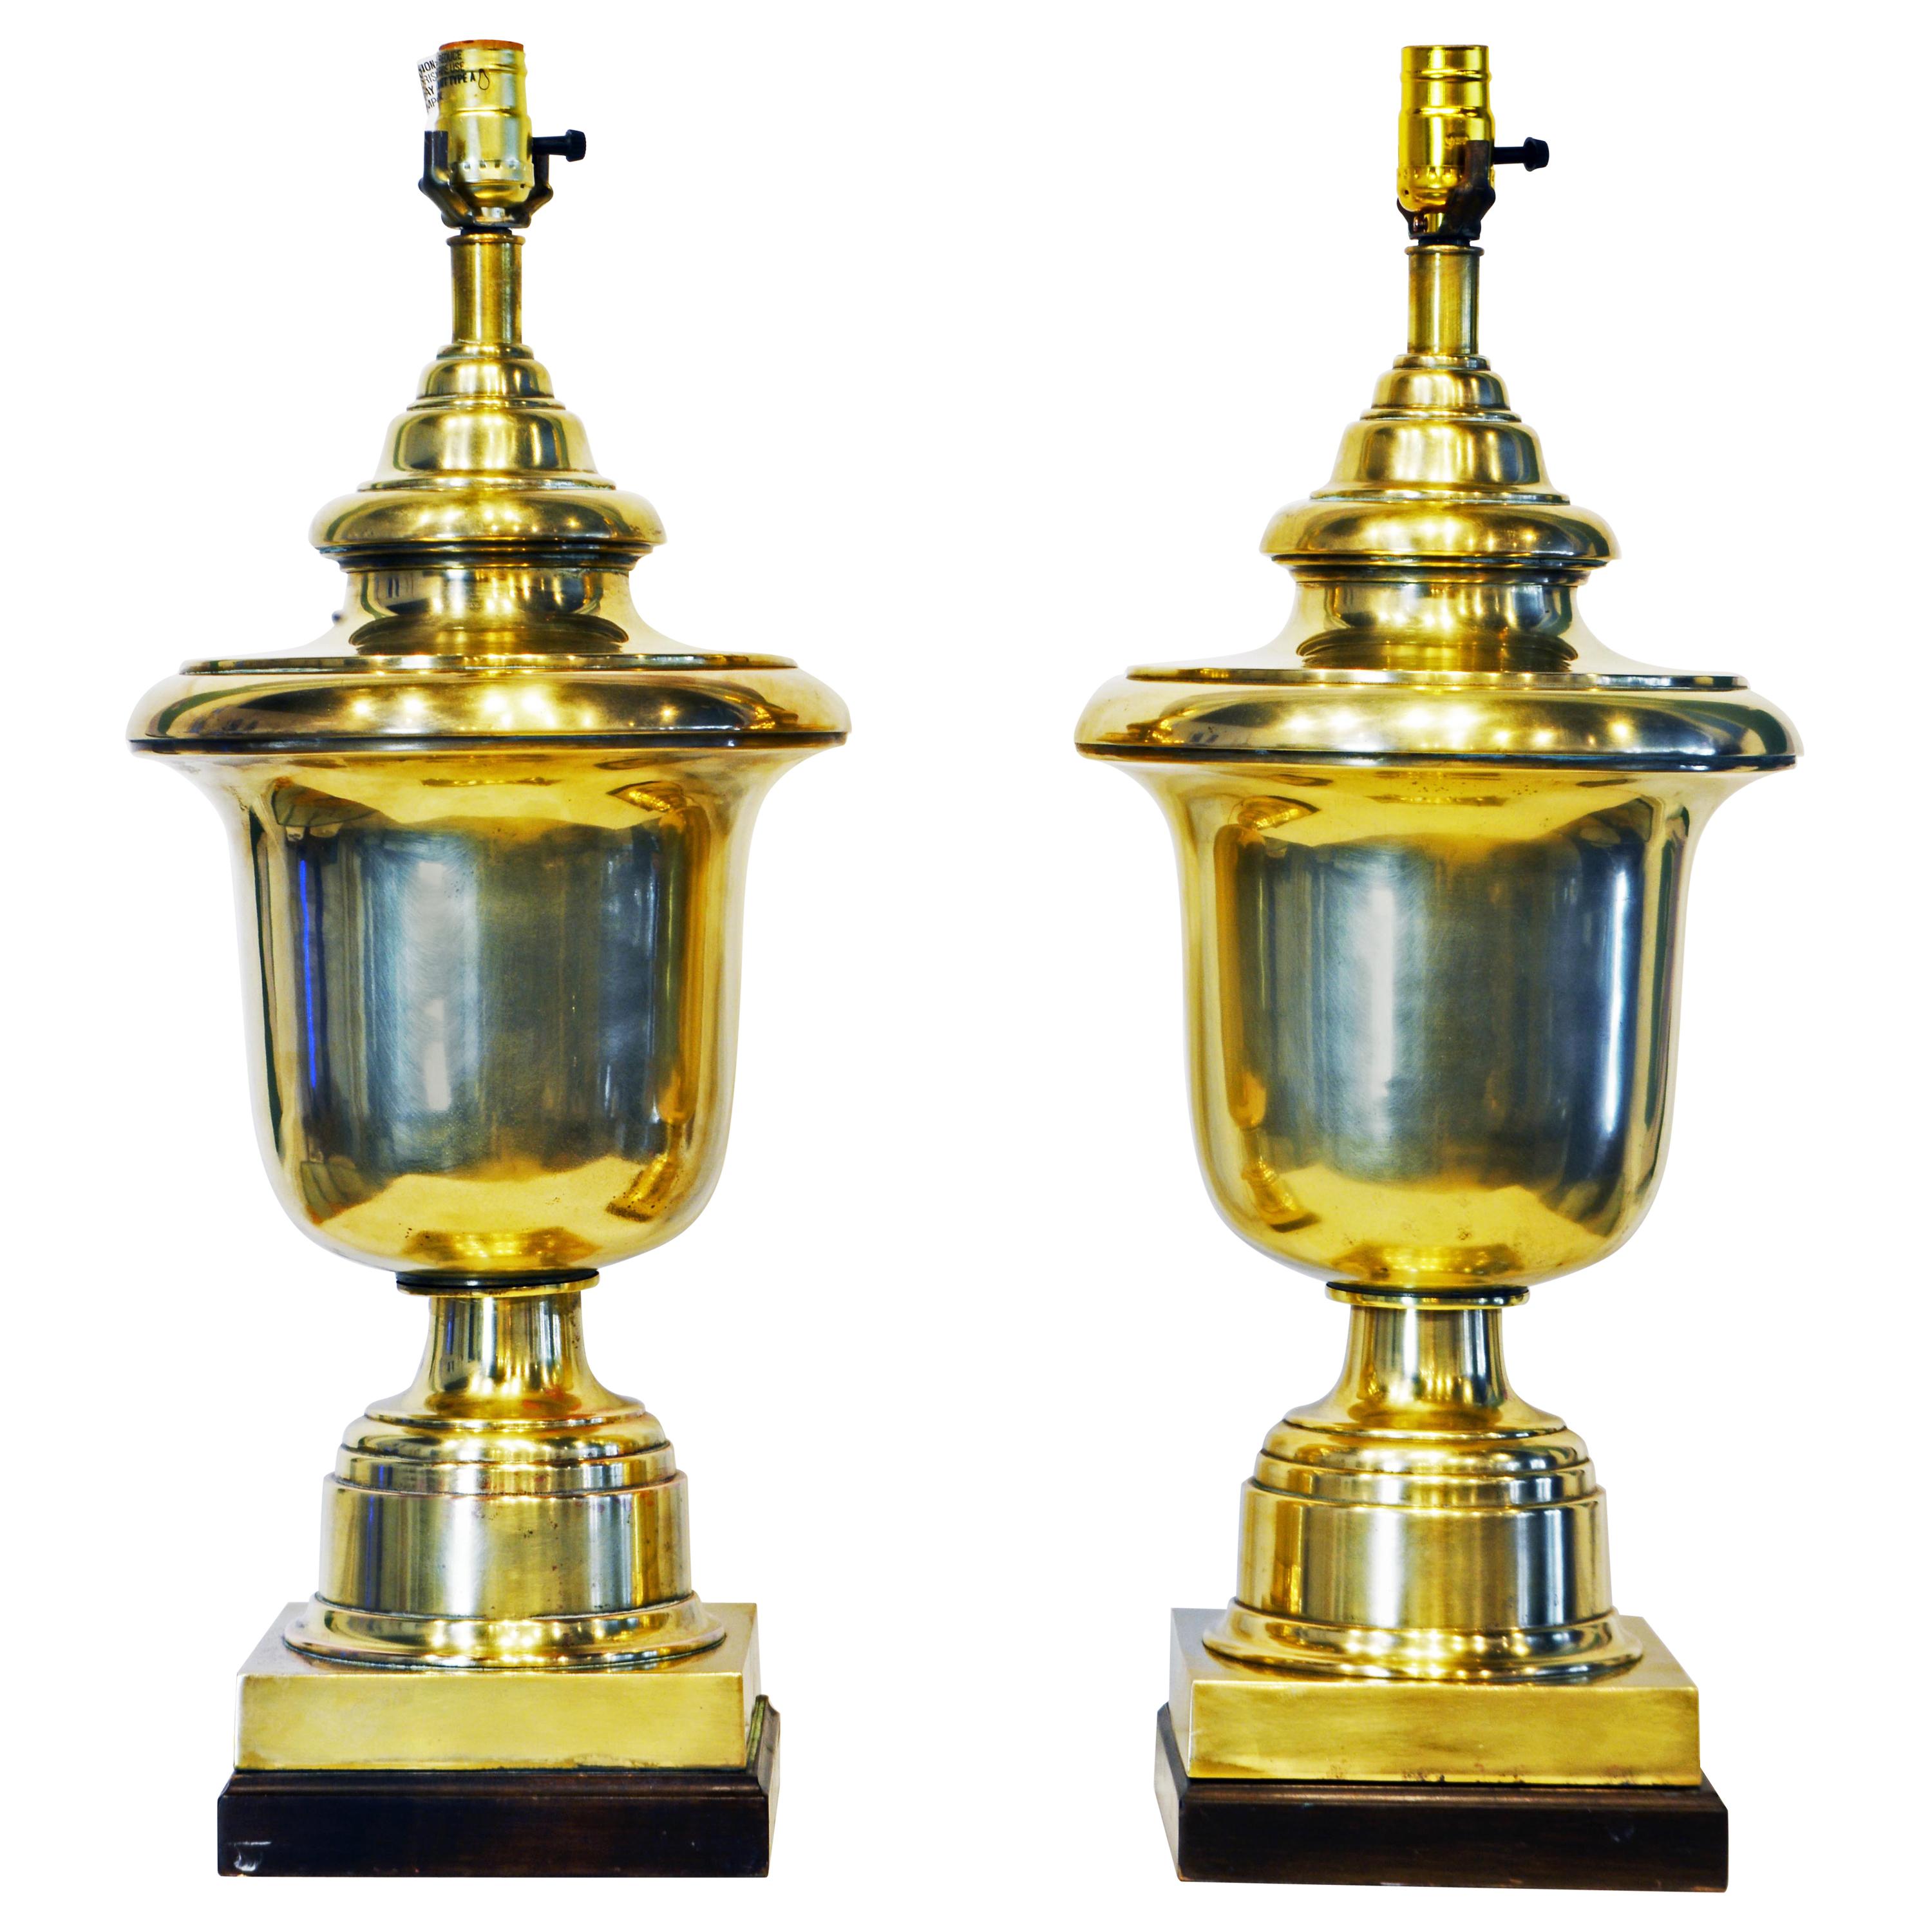 Pair of Large Neoclassical Solid Brass Urn Table Lamps by Frederick Cooper Co